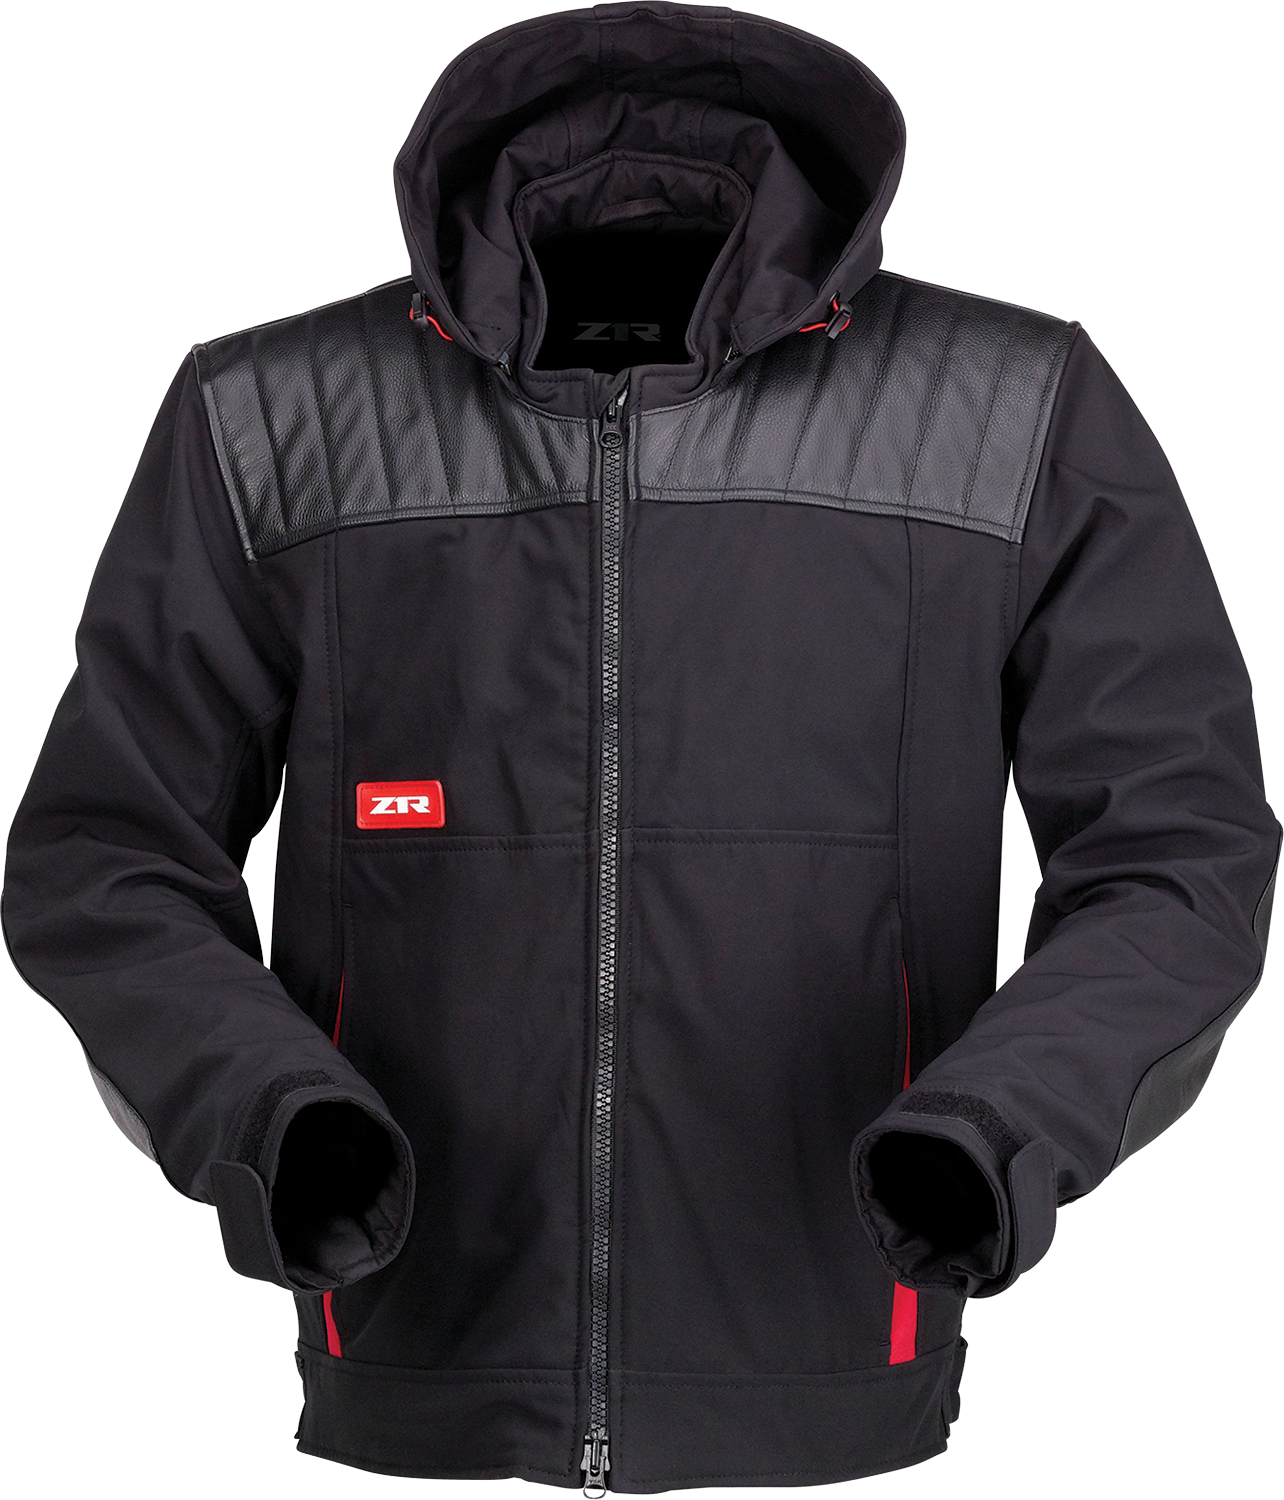 Z1R Armored Jacket - Black/Red - 3XL 2820-6214